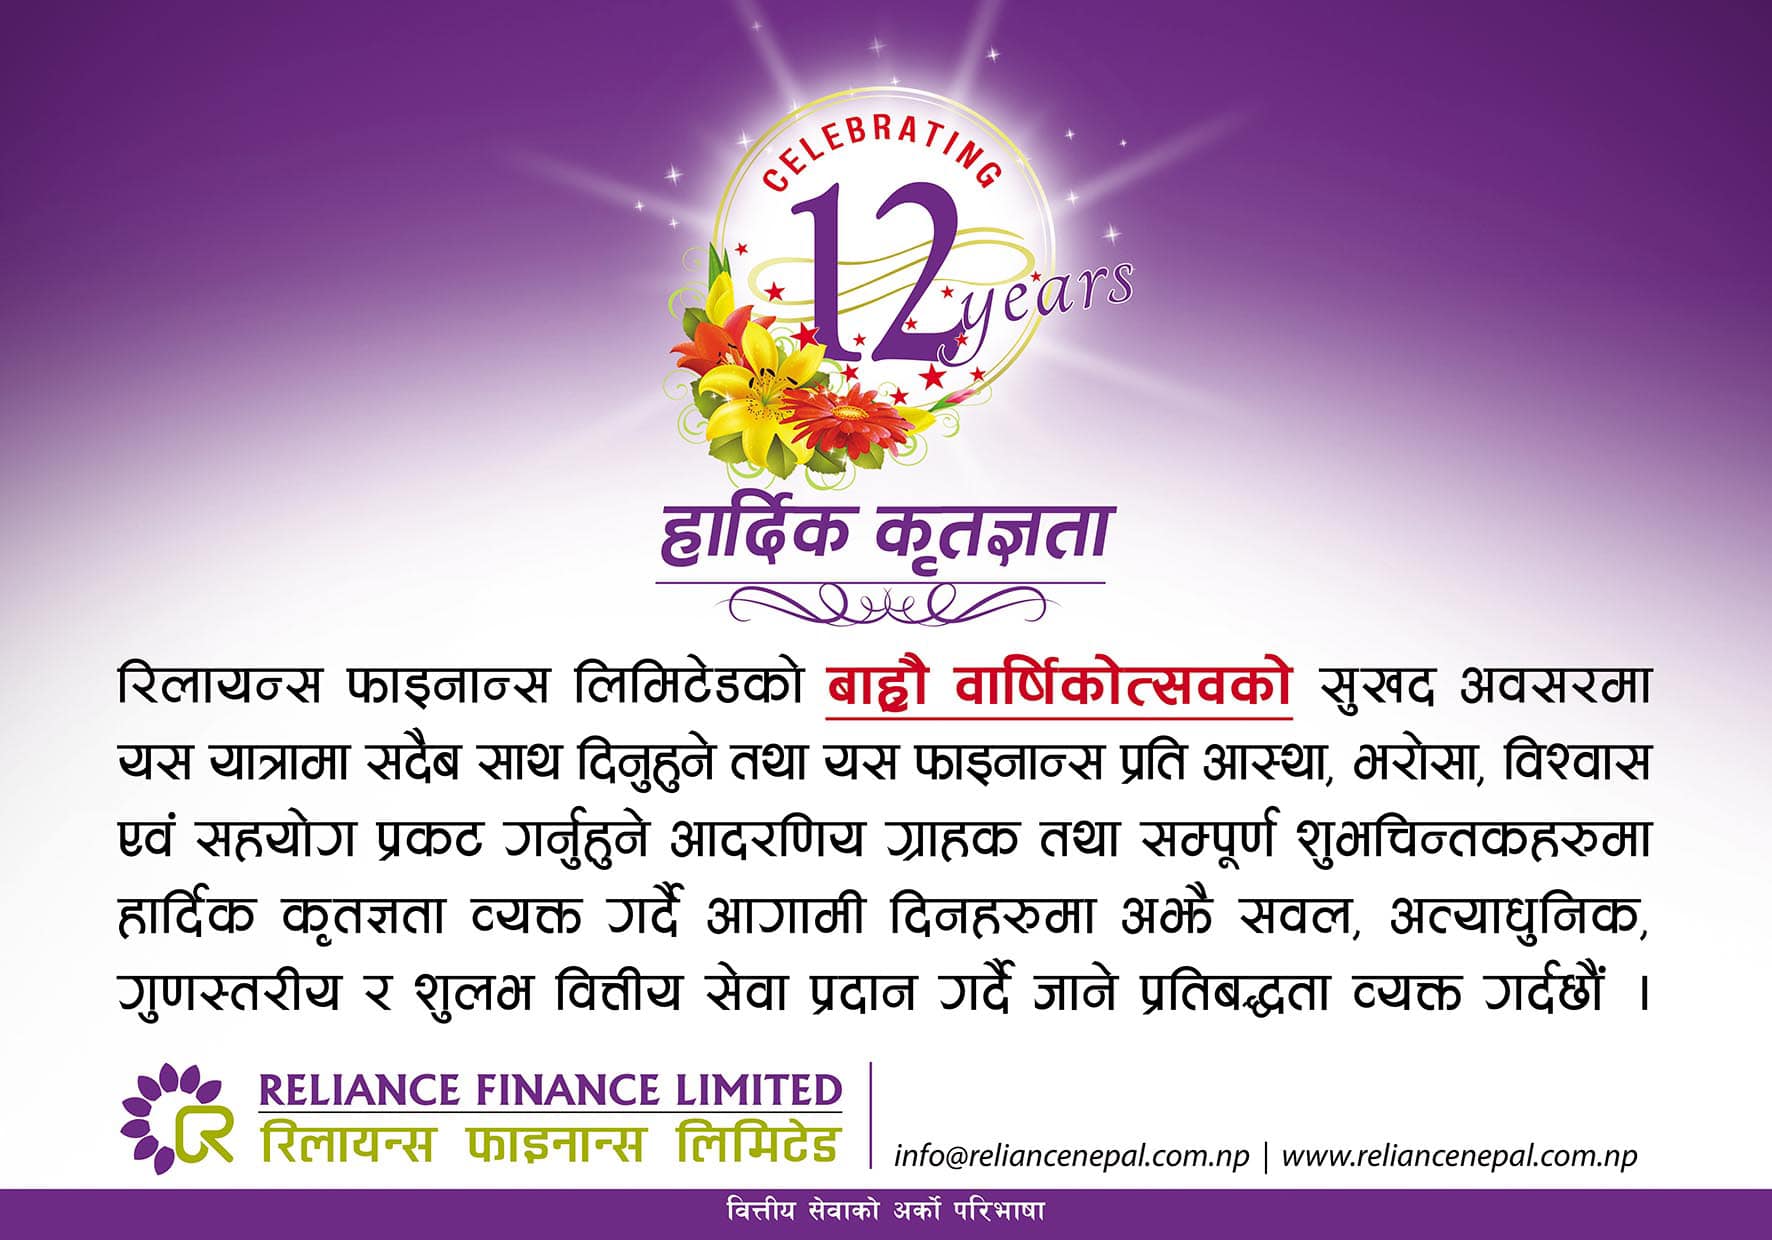 Reliance Finance Limited Celebrates  its 12 Year Anniversary